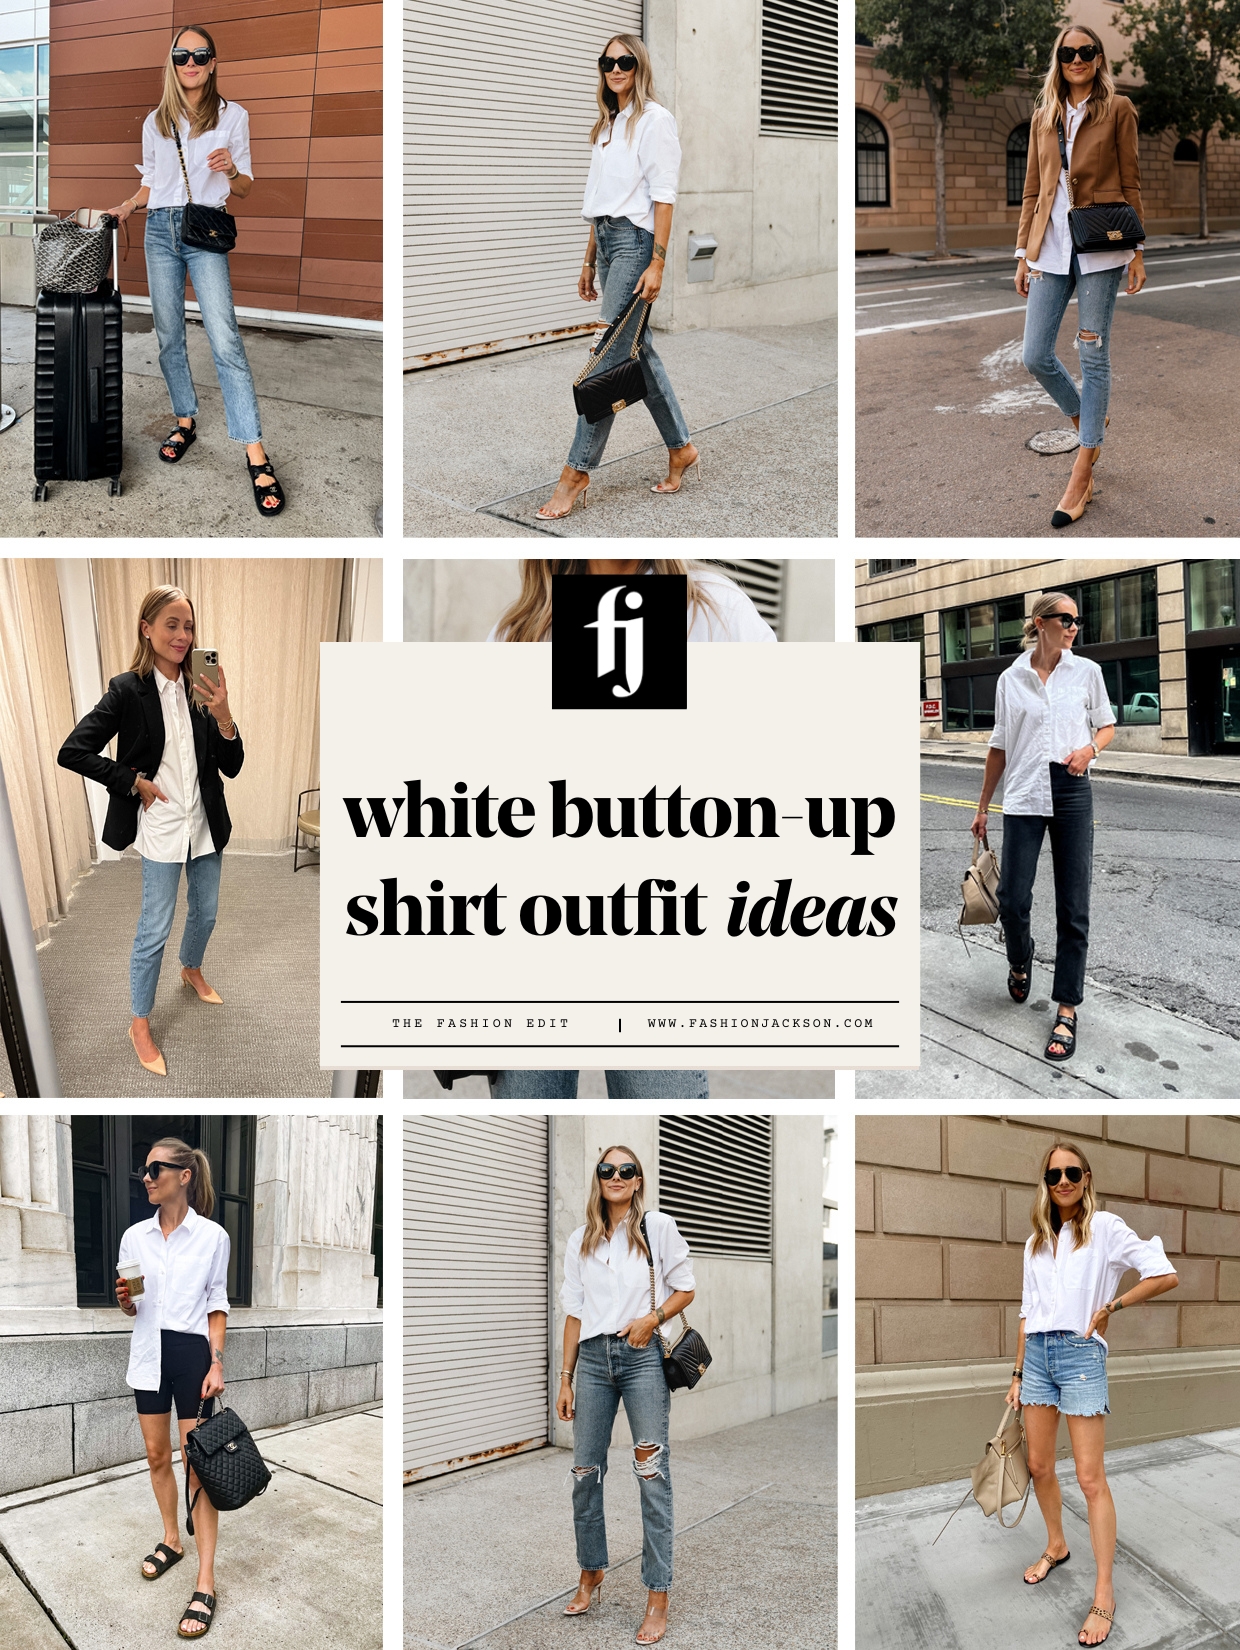 Business casual women jeans outfit ideas  White shirt outfits, White shirts  women, Classic outfits